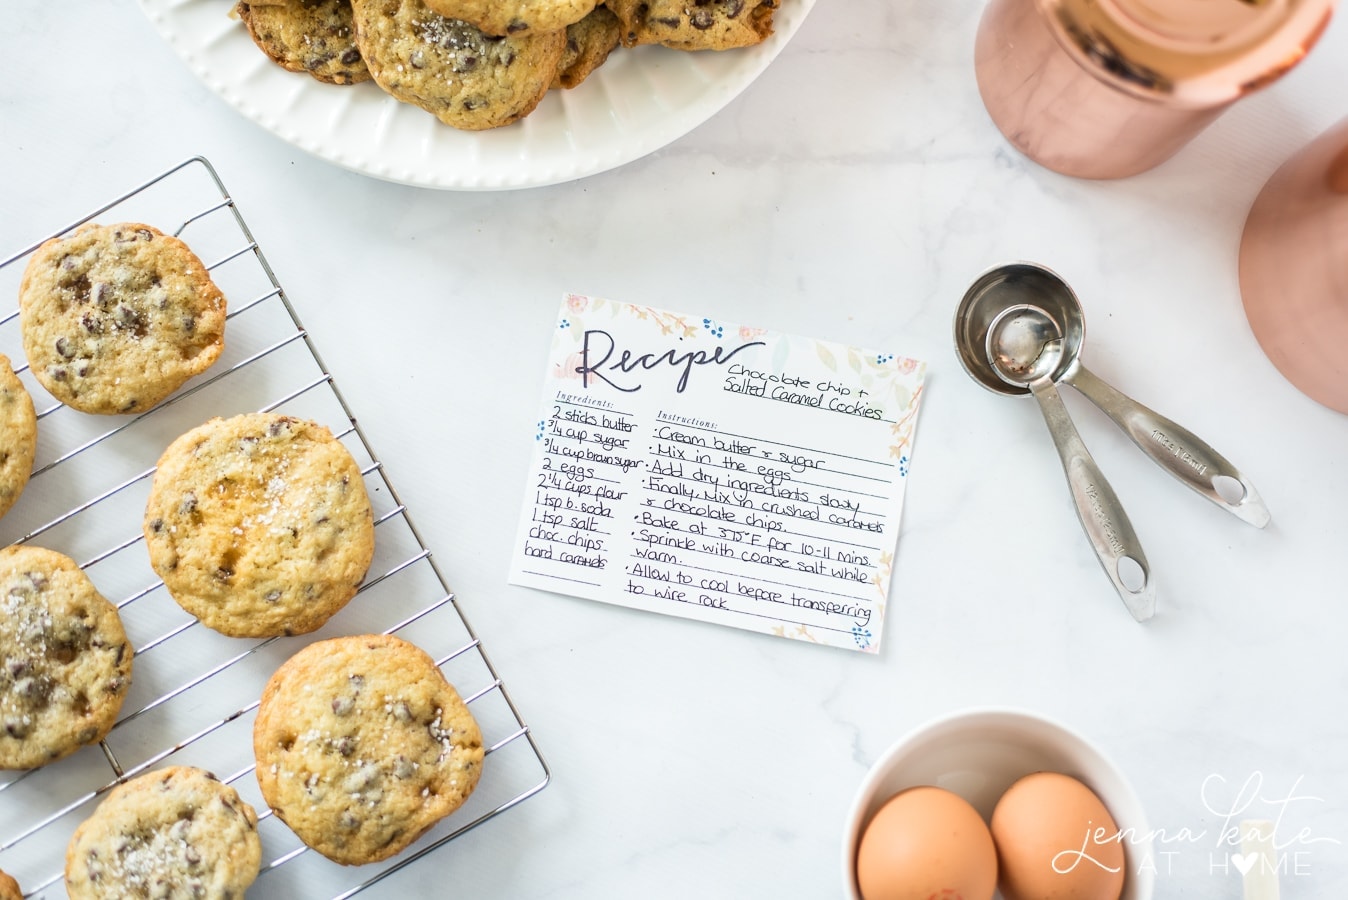 An artful display of a hand-written recipe in the center, surrounded by the edges of a plate of cookies, measuring cups and spoons, a bowl of eggs and the actual cookies on a wire cooling rack